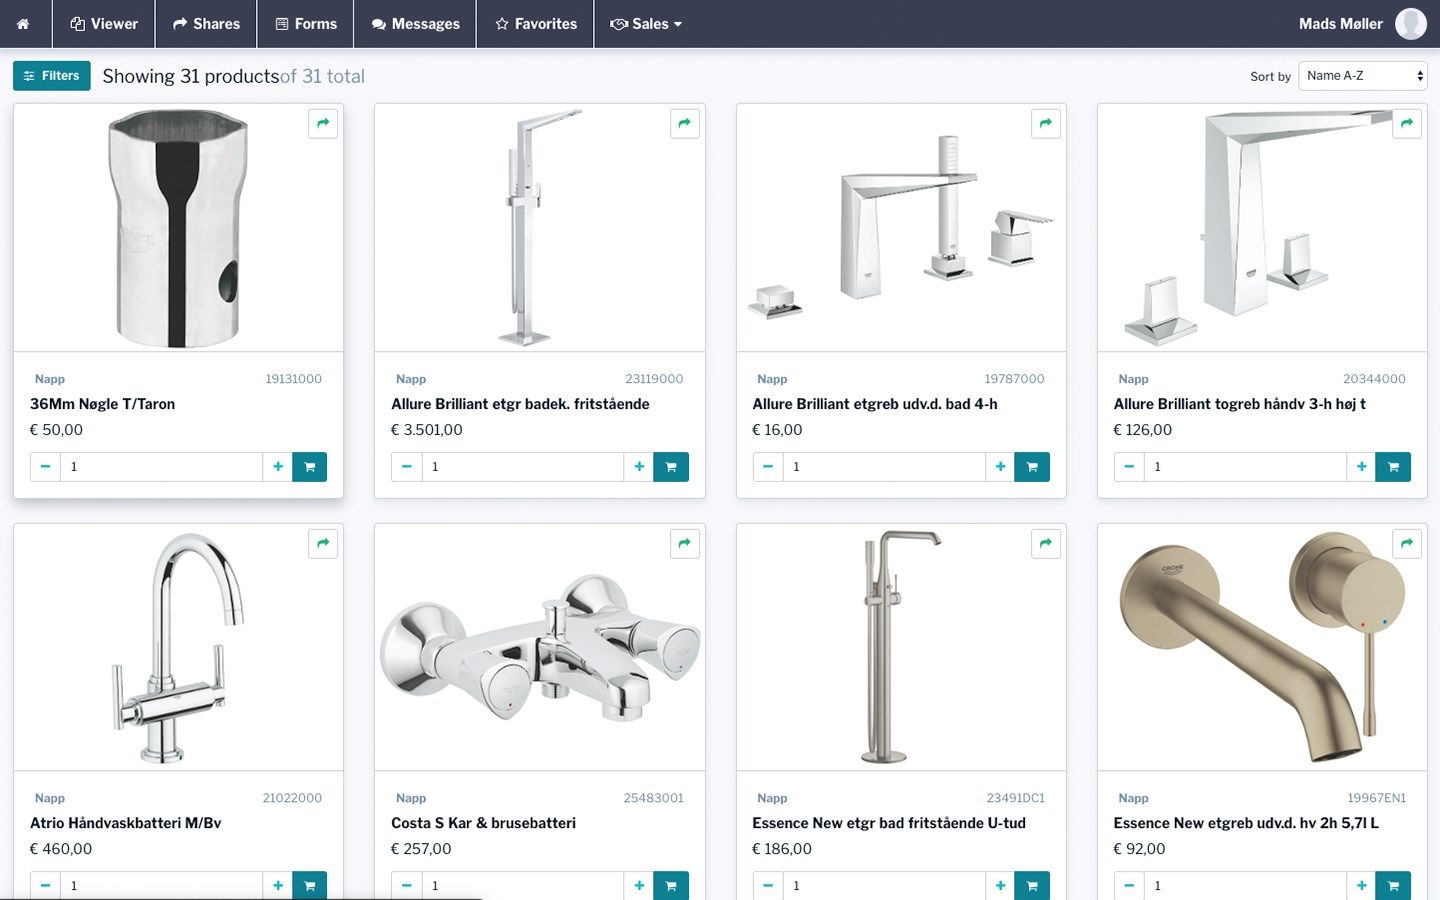 Browse the entire product line with segmented pricing and realtime stock information